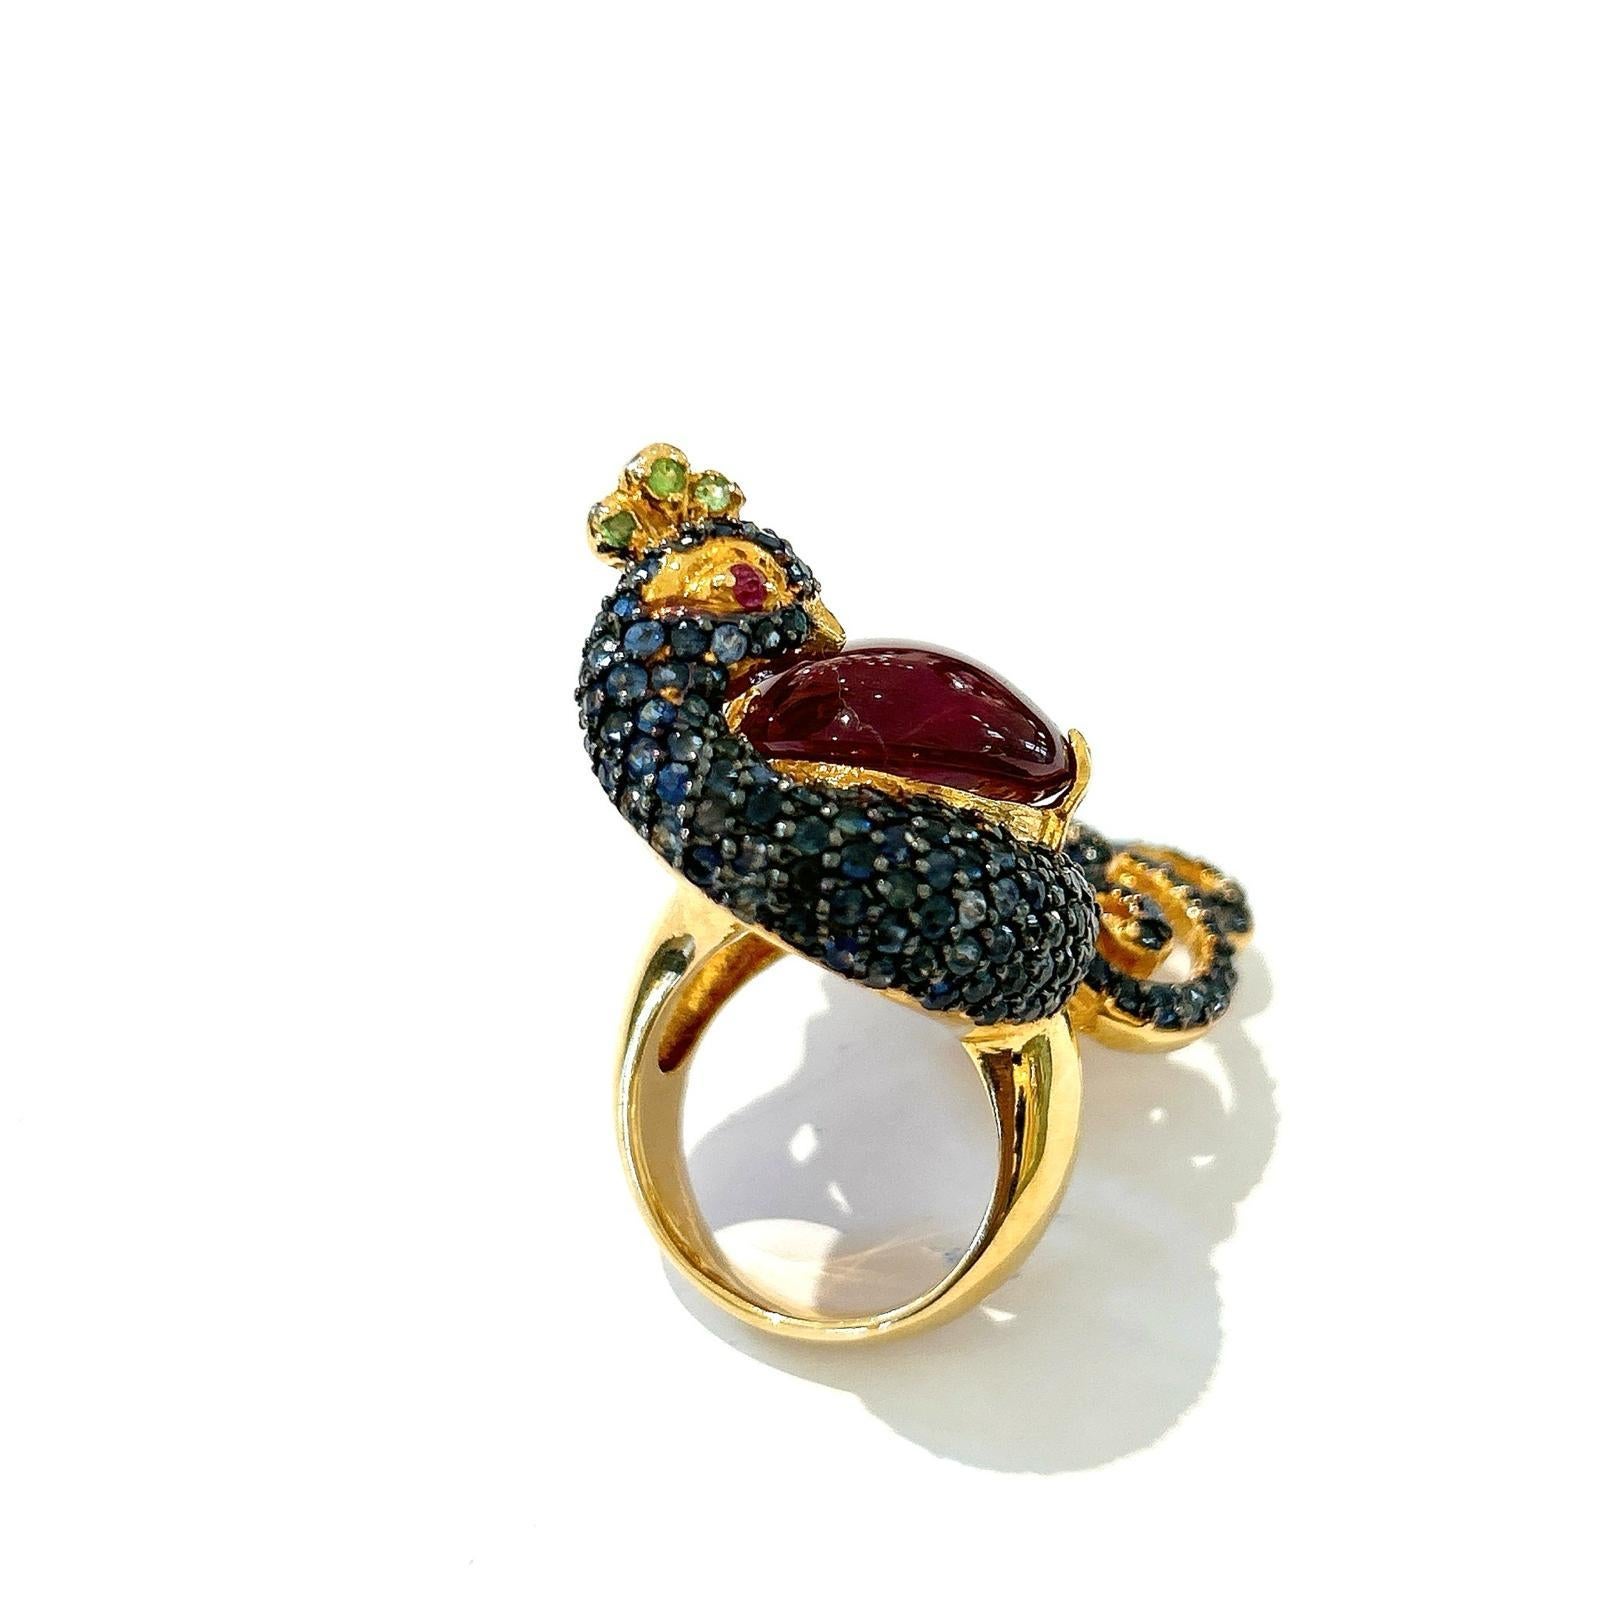 Bochic “Orient” Ruby & Sapphire Swan Cocktail Ring Set 18K & Silver  For Sale 6